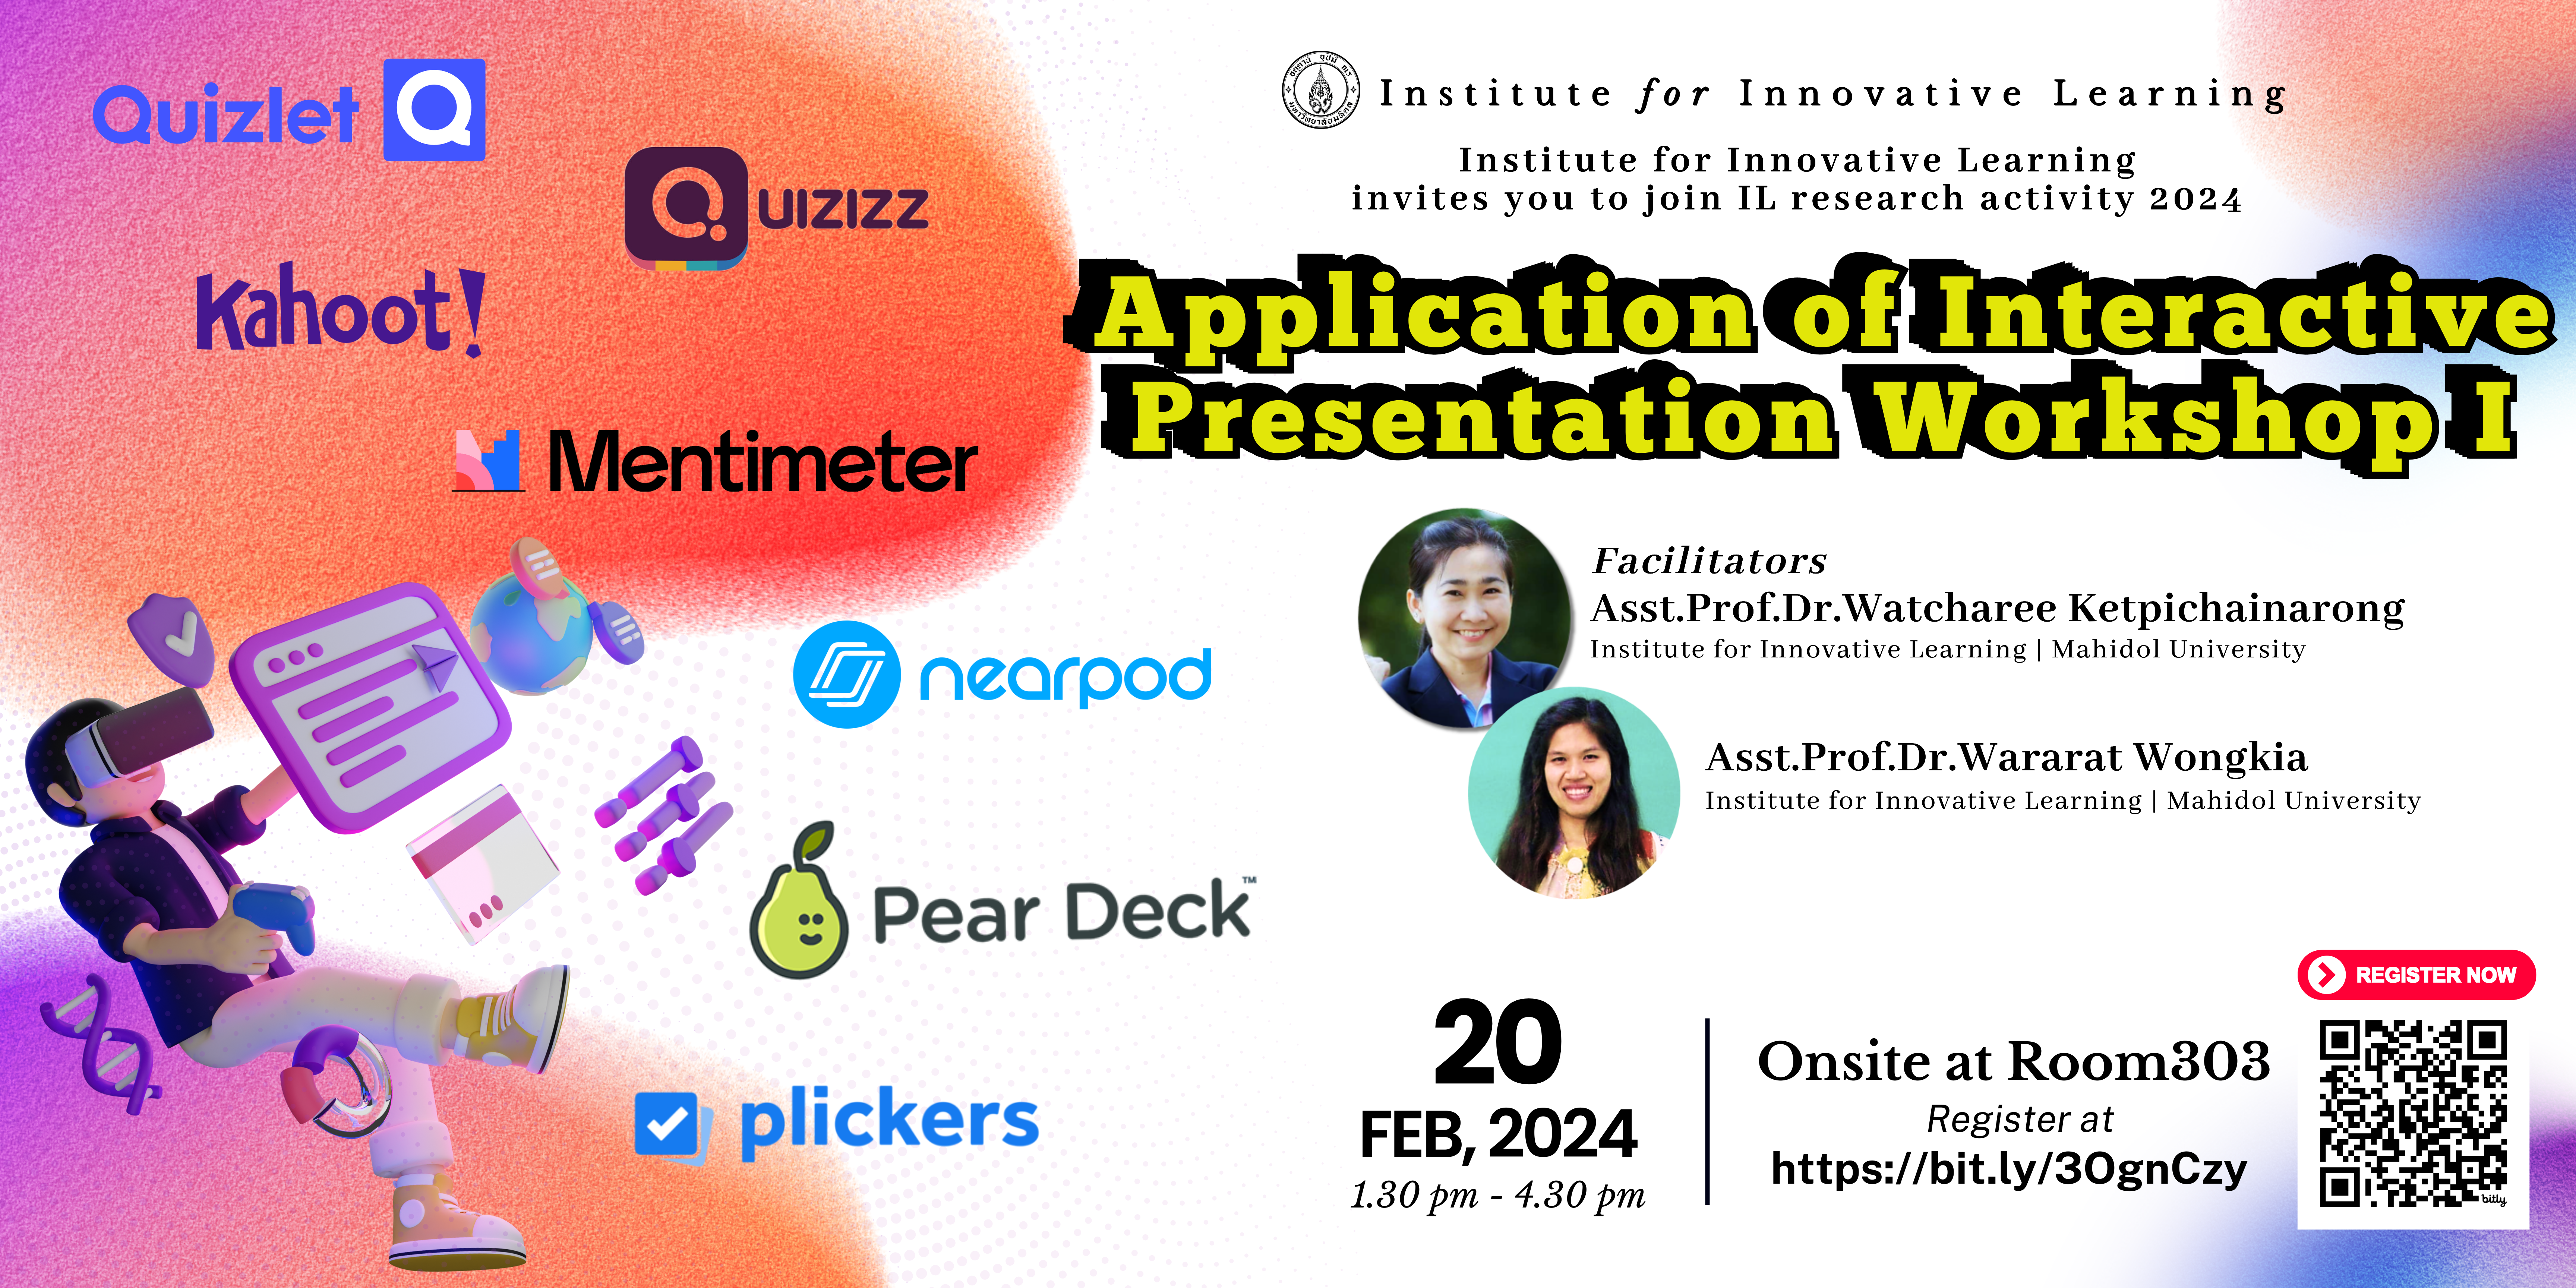 IL Research Activity “Application of Interactive Presentation Workshop I”